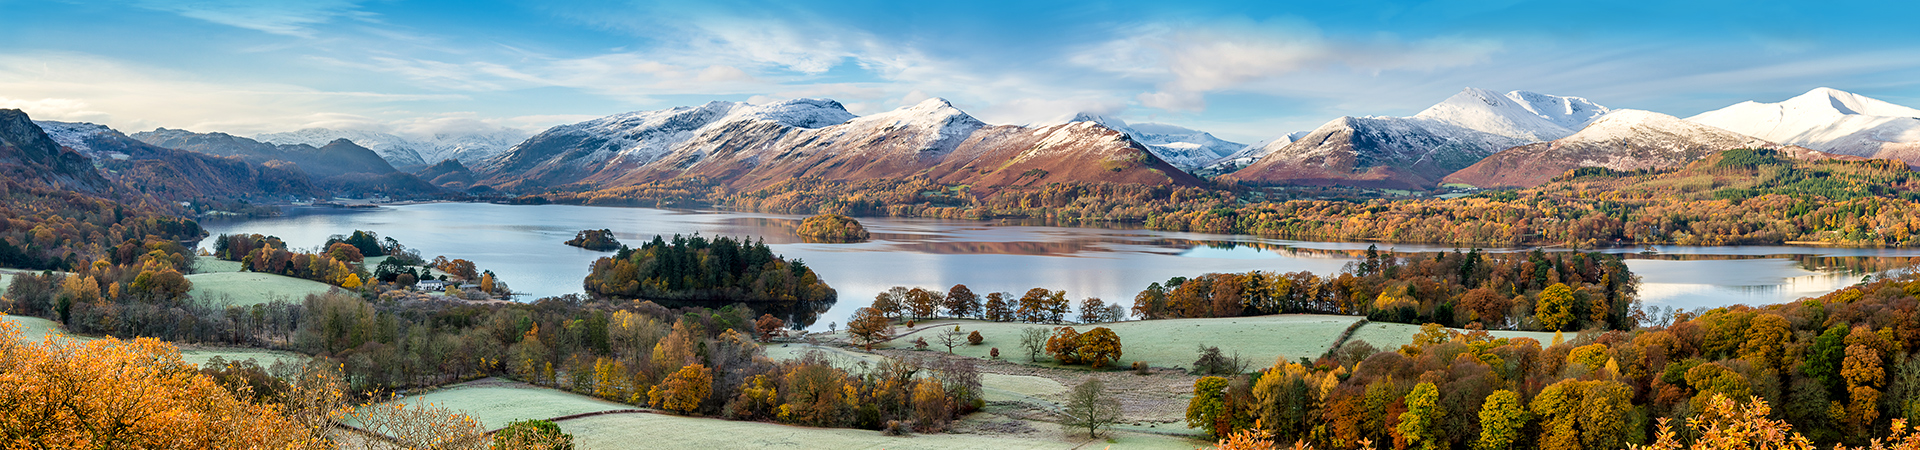 Self-catering holiday in the Lake District